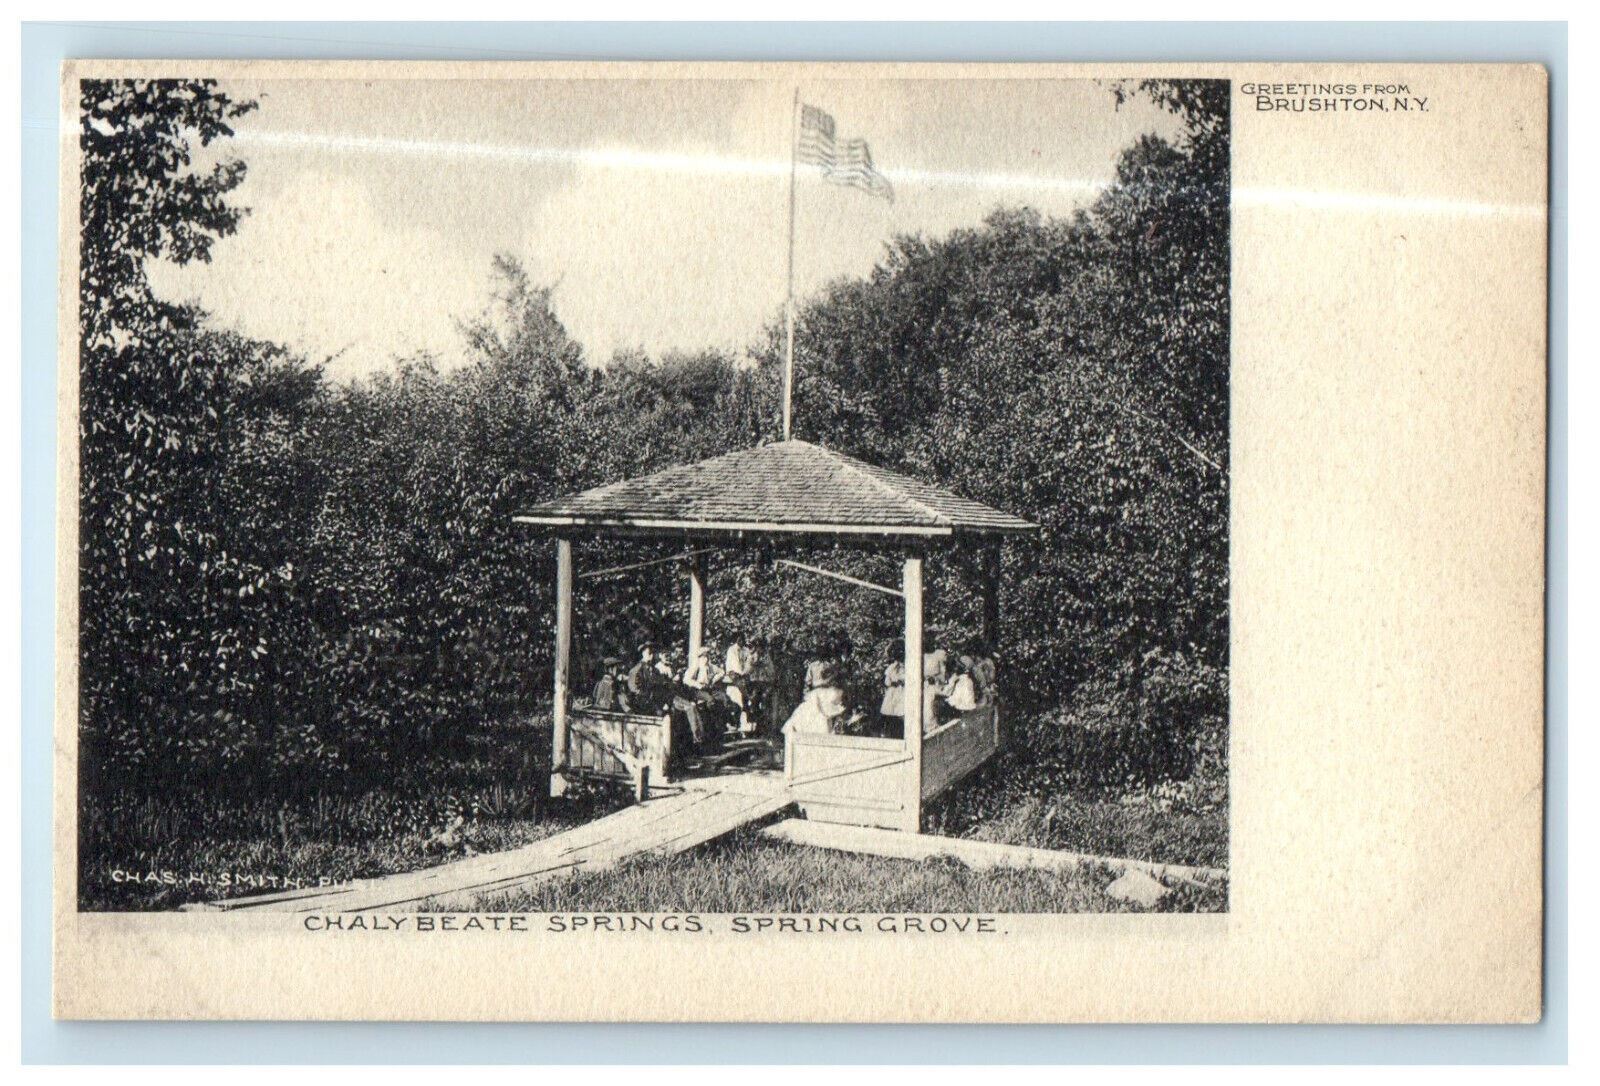 c1905 Chalybeate Springs Spring Grove Greetings from Brushton NY Postcard